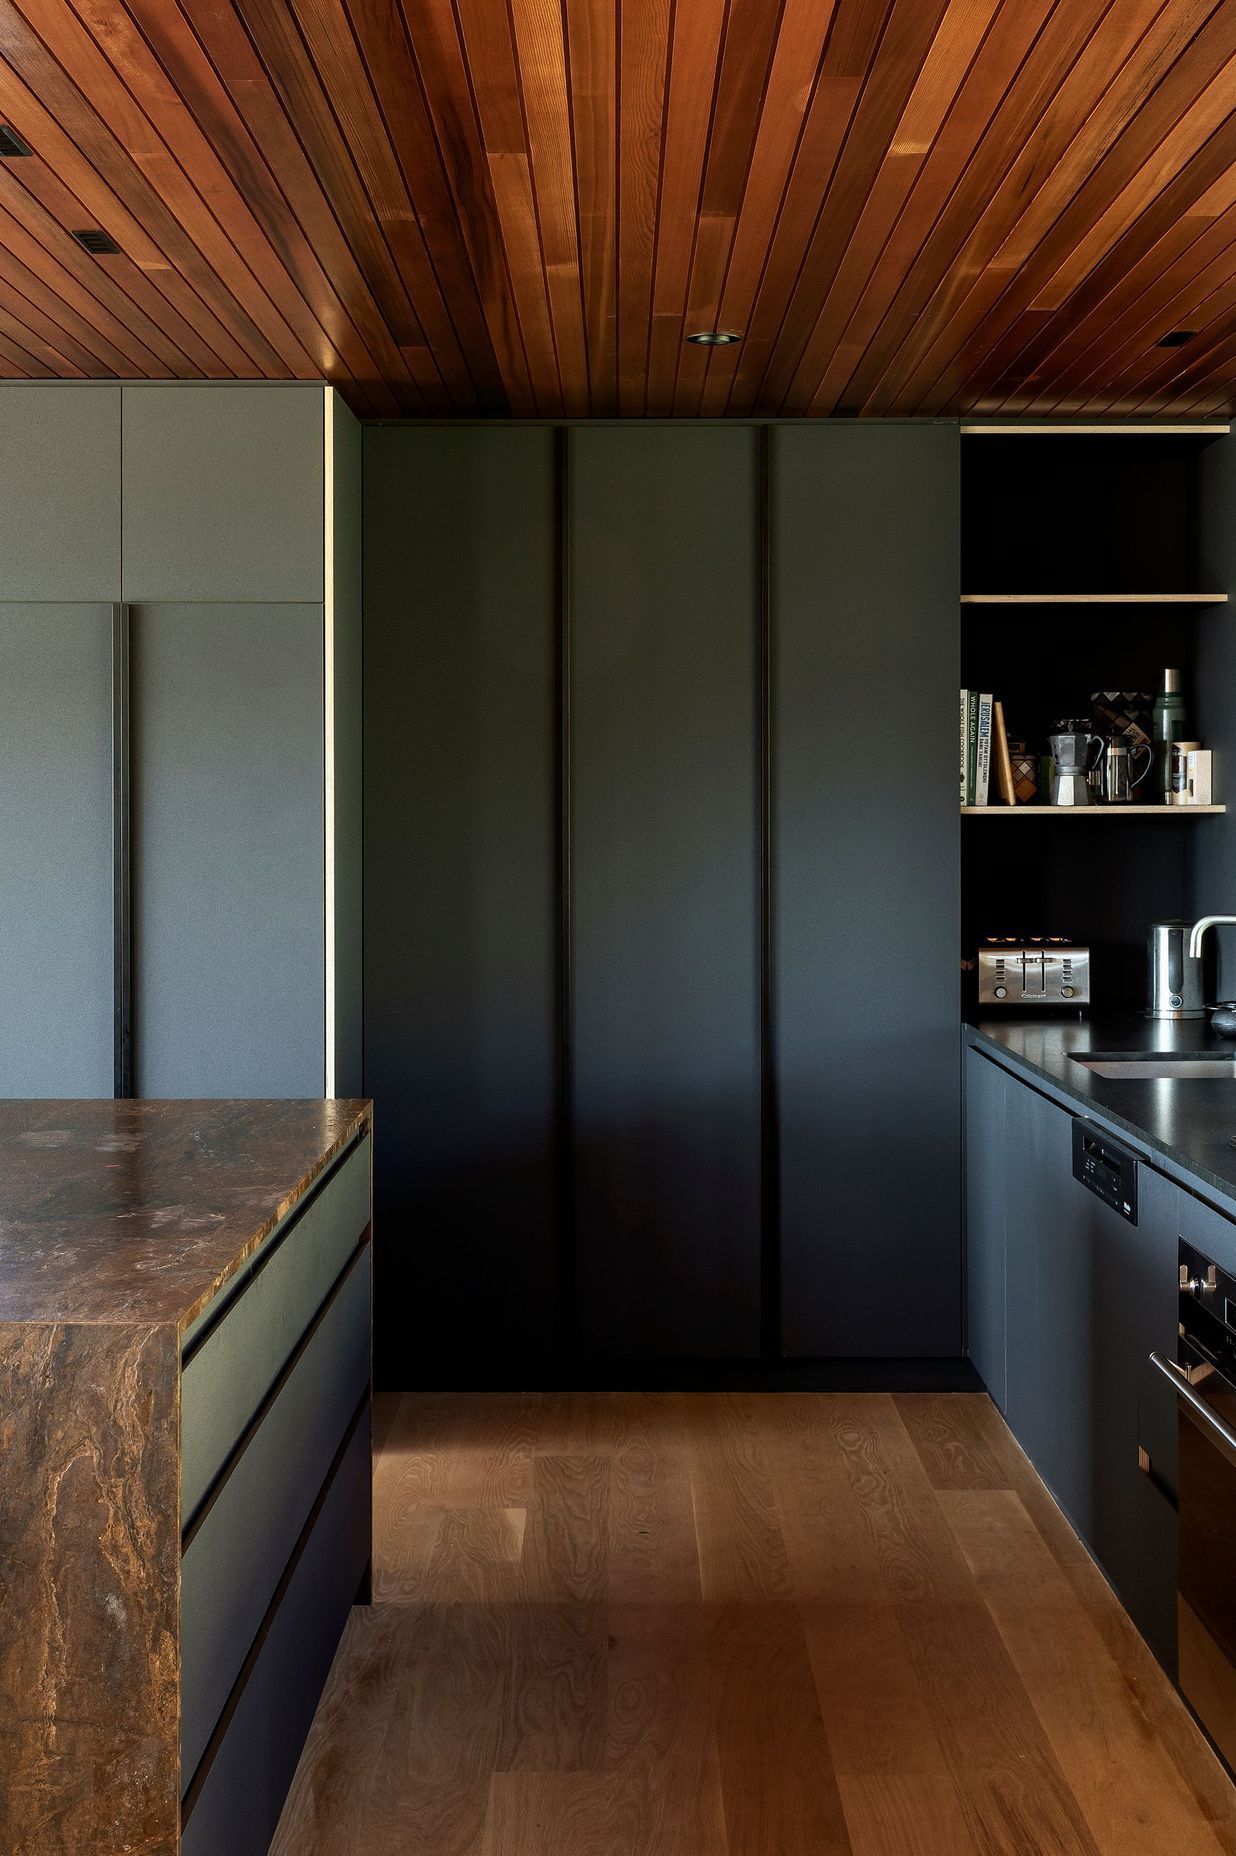 The bronzite benchtop and dark cabinetry give the kitchen a recessed and moody feel.